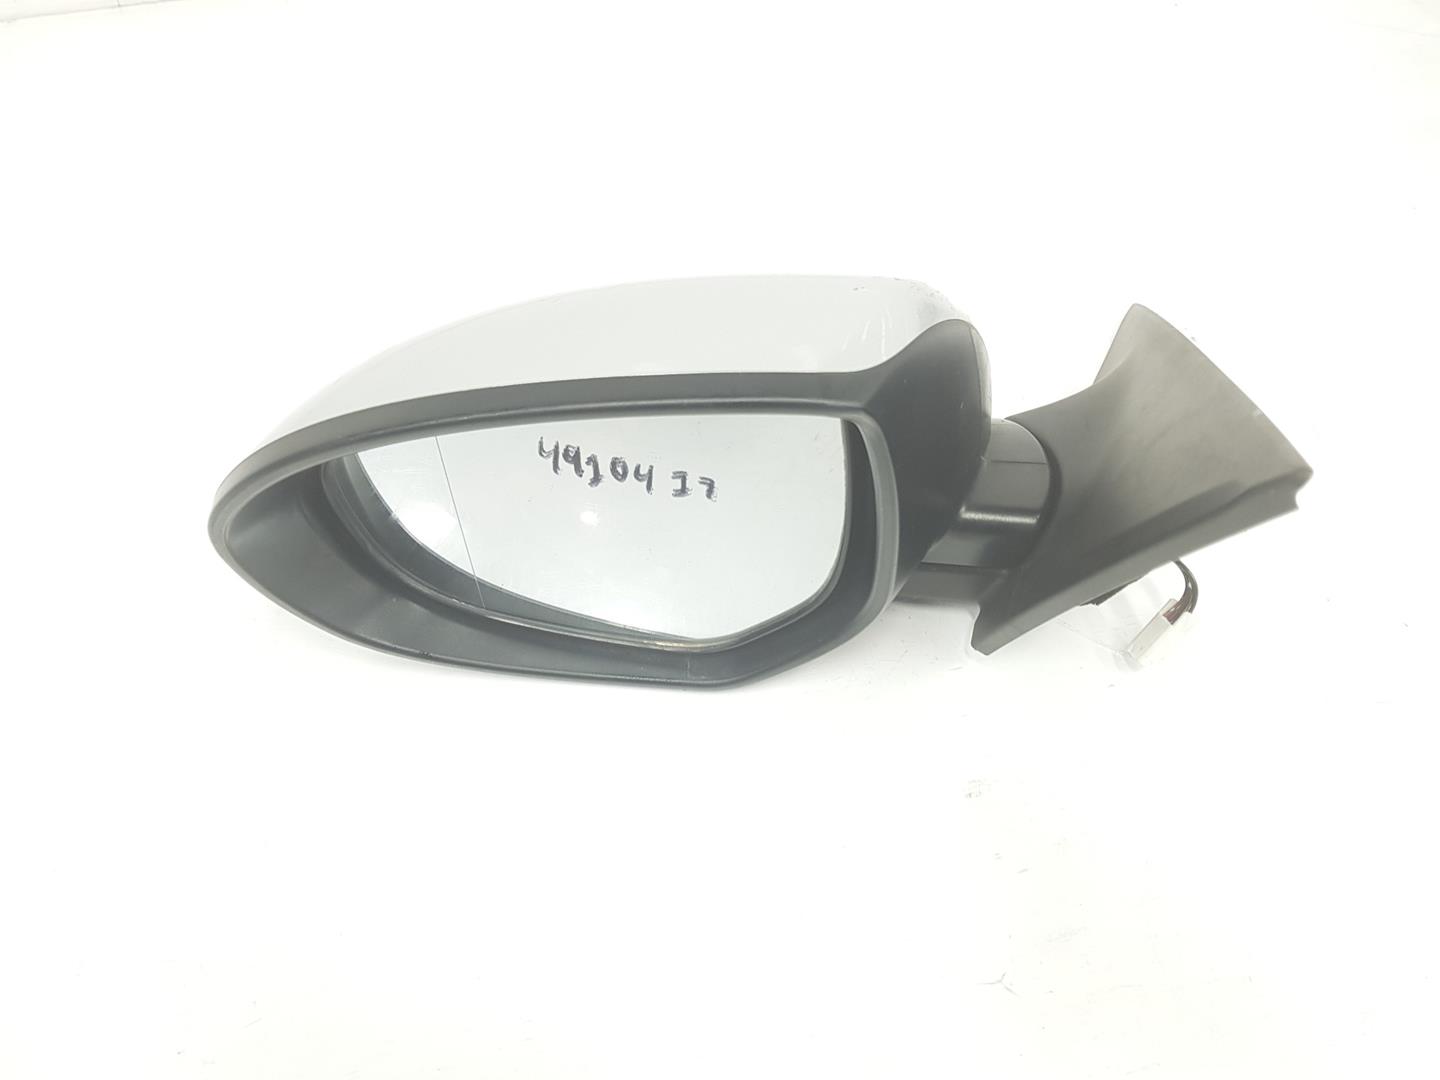 MAZDA 6 GH (2007-2013) Left Side Wing Mirror GS1F69180C67, GS1F69180C67, COLORGRIS22V 19908776